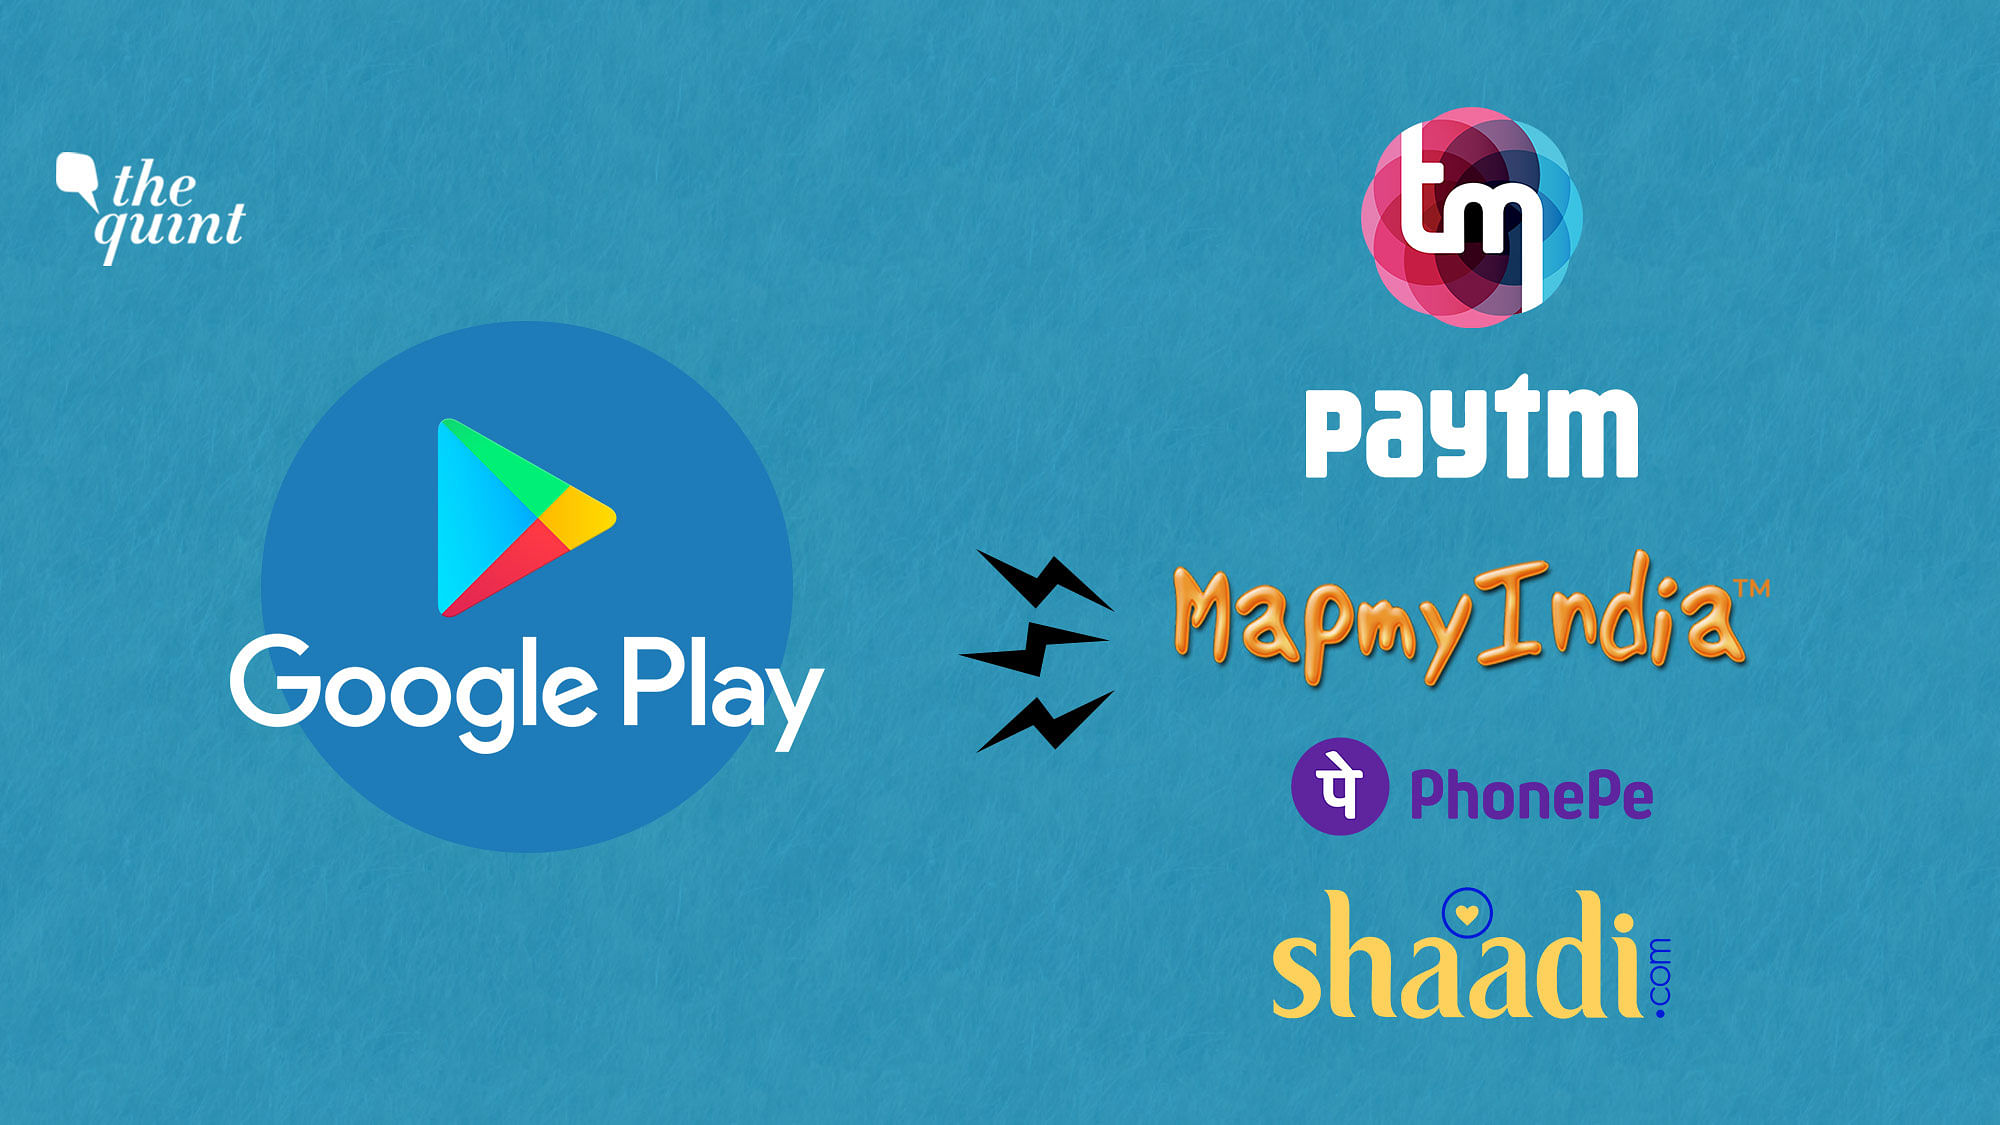 Amid reports of Indian apps’ unhappiness over Google Play Store’s new billing policy and its levy of a 30 percent commission on in-app purchases, apps have issued a clarification.